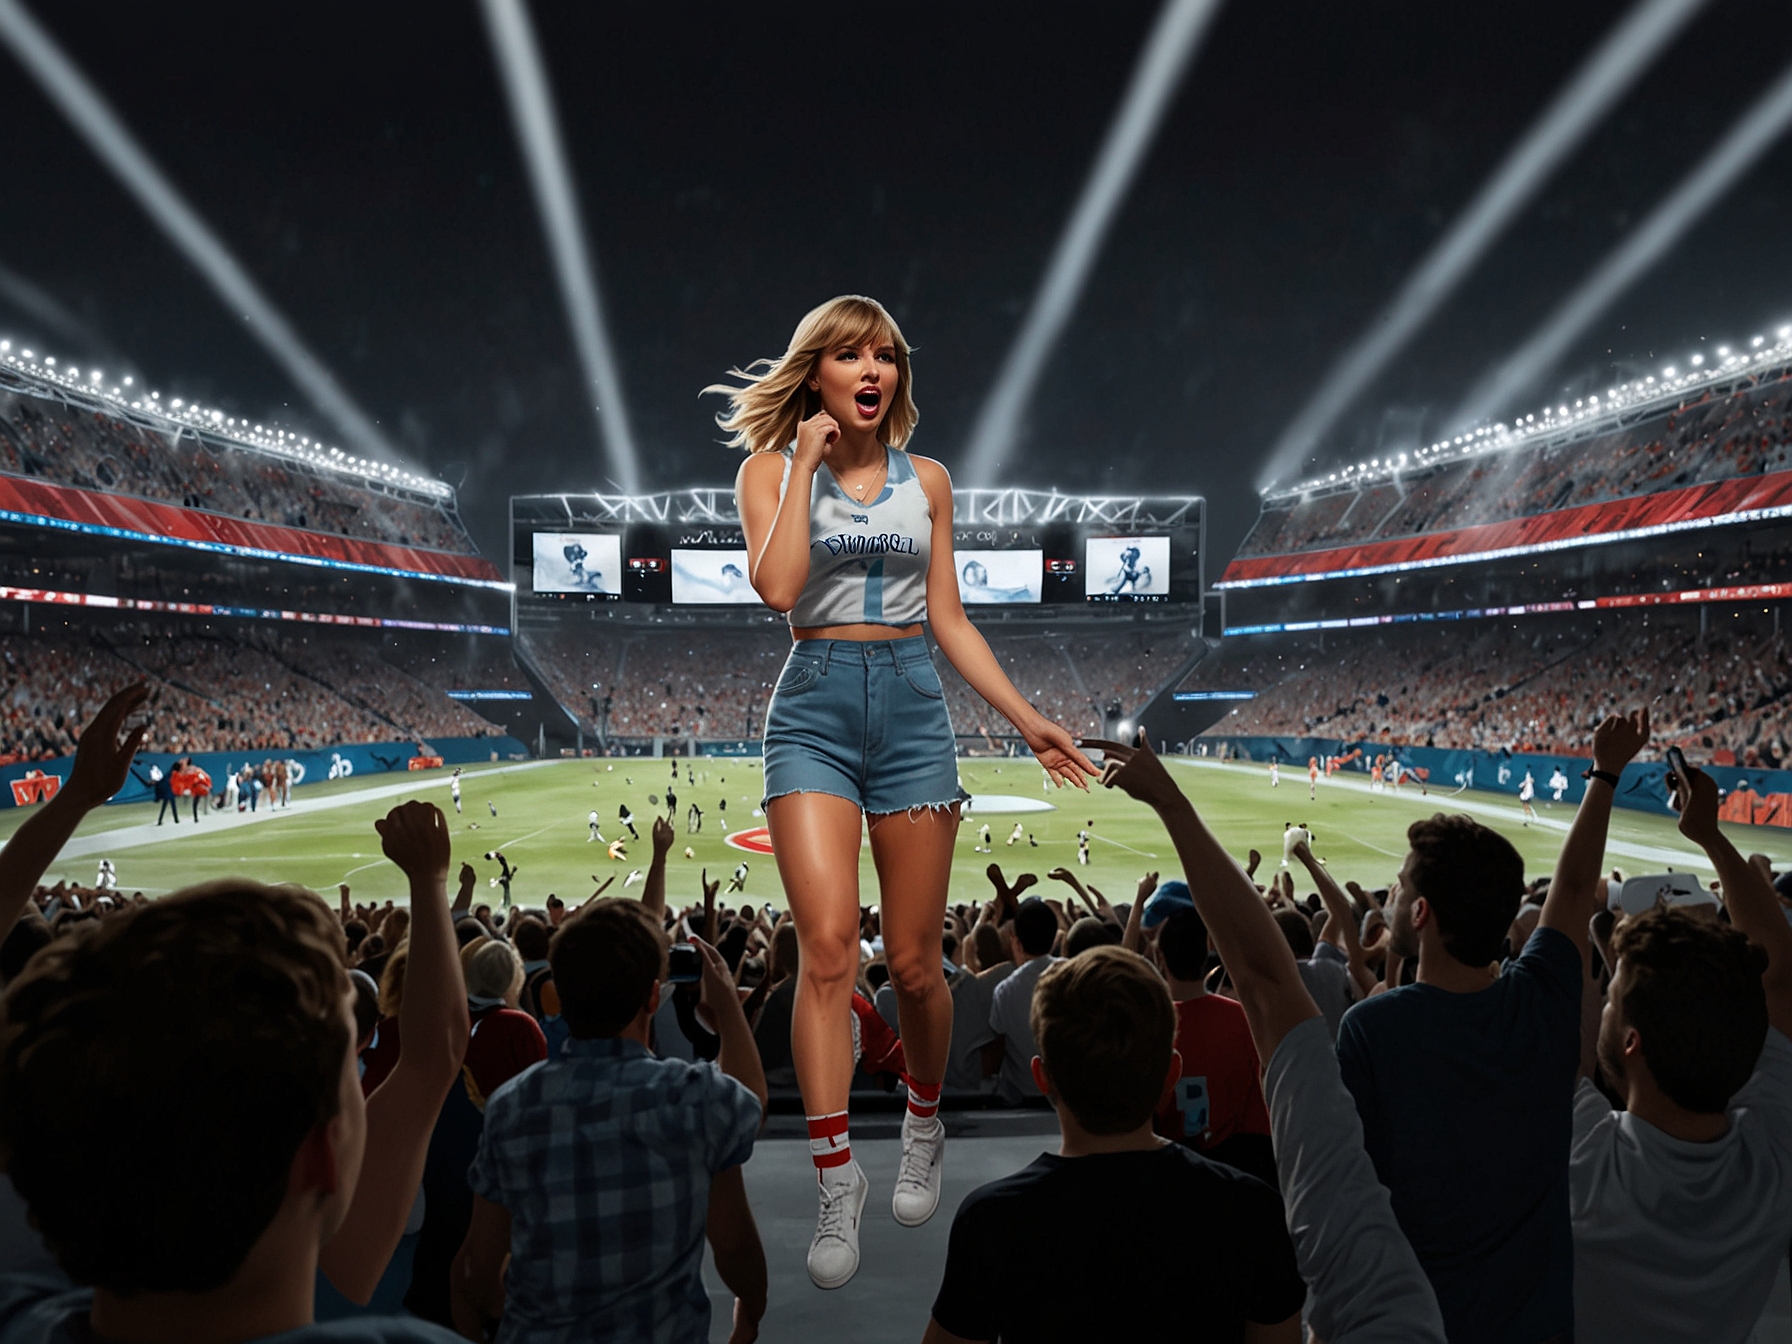 Fans at Wembley Stadium react joyfully as Taylor Swift teases a special guest before NFL star Travis Kelce walks onto the stage, amplifying the concert's entertainment value.